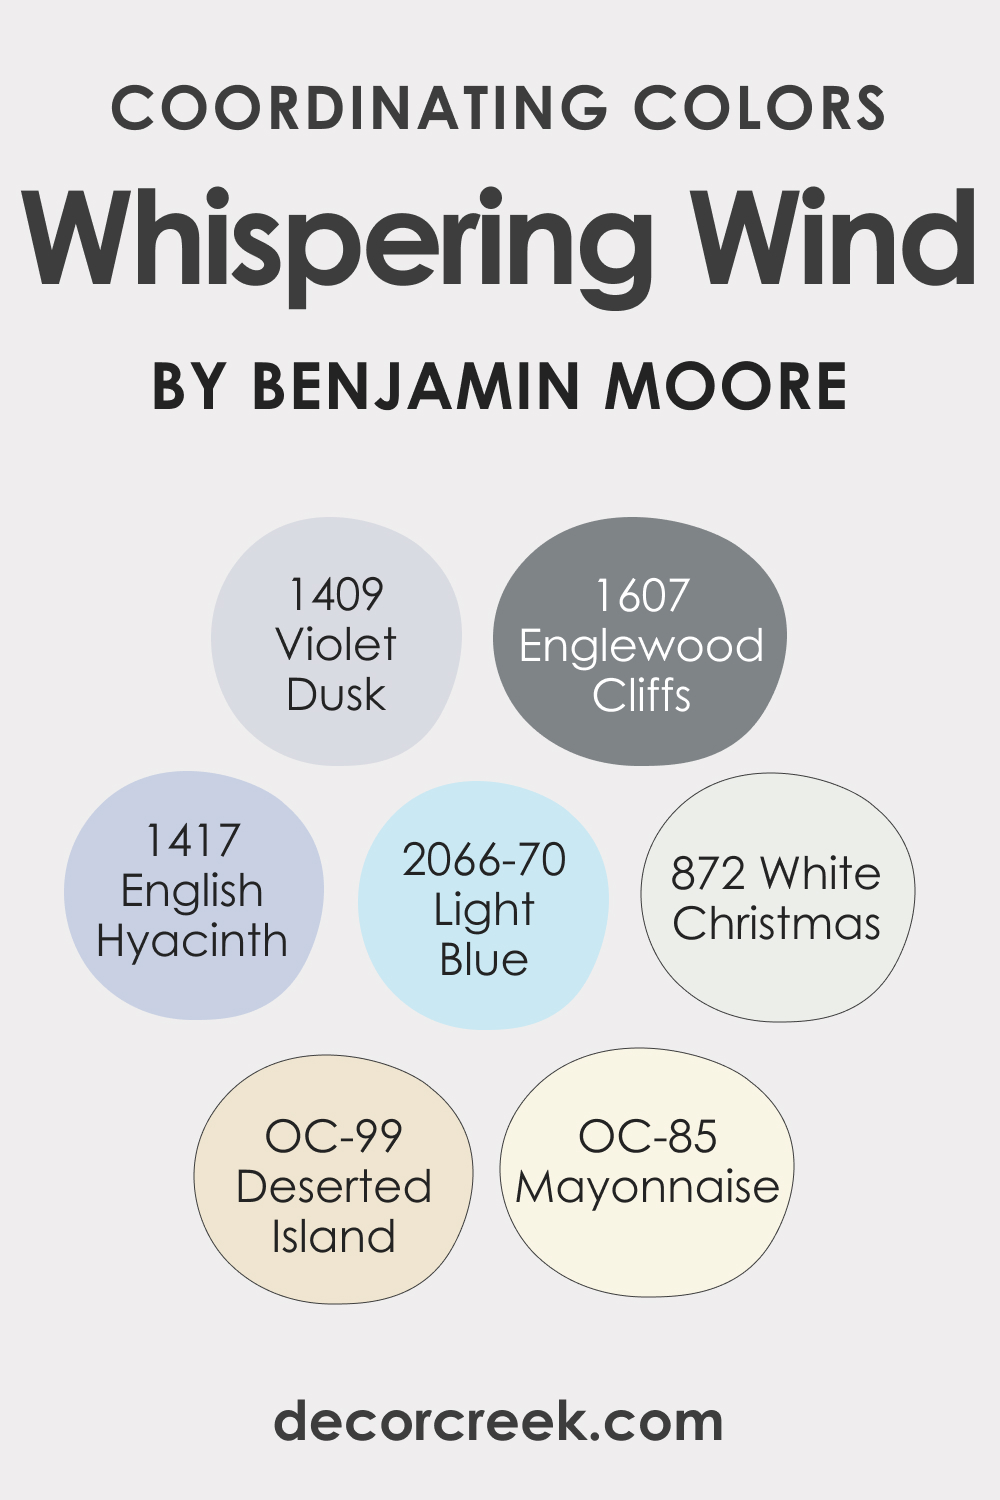 Coordinating Colors of Whispering Wind 1416